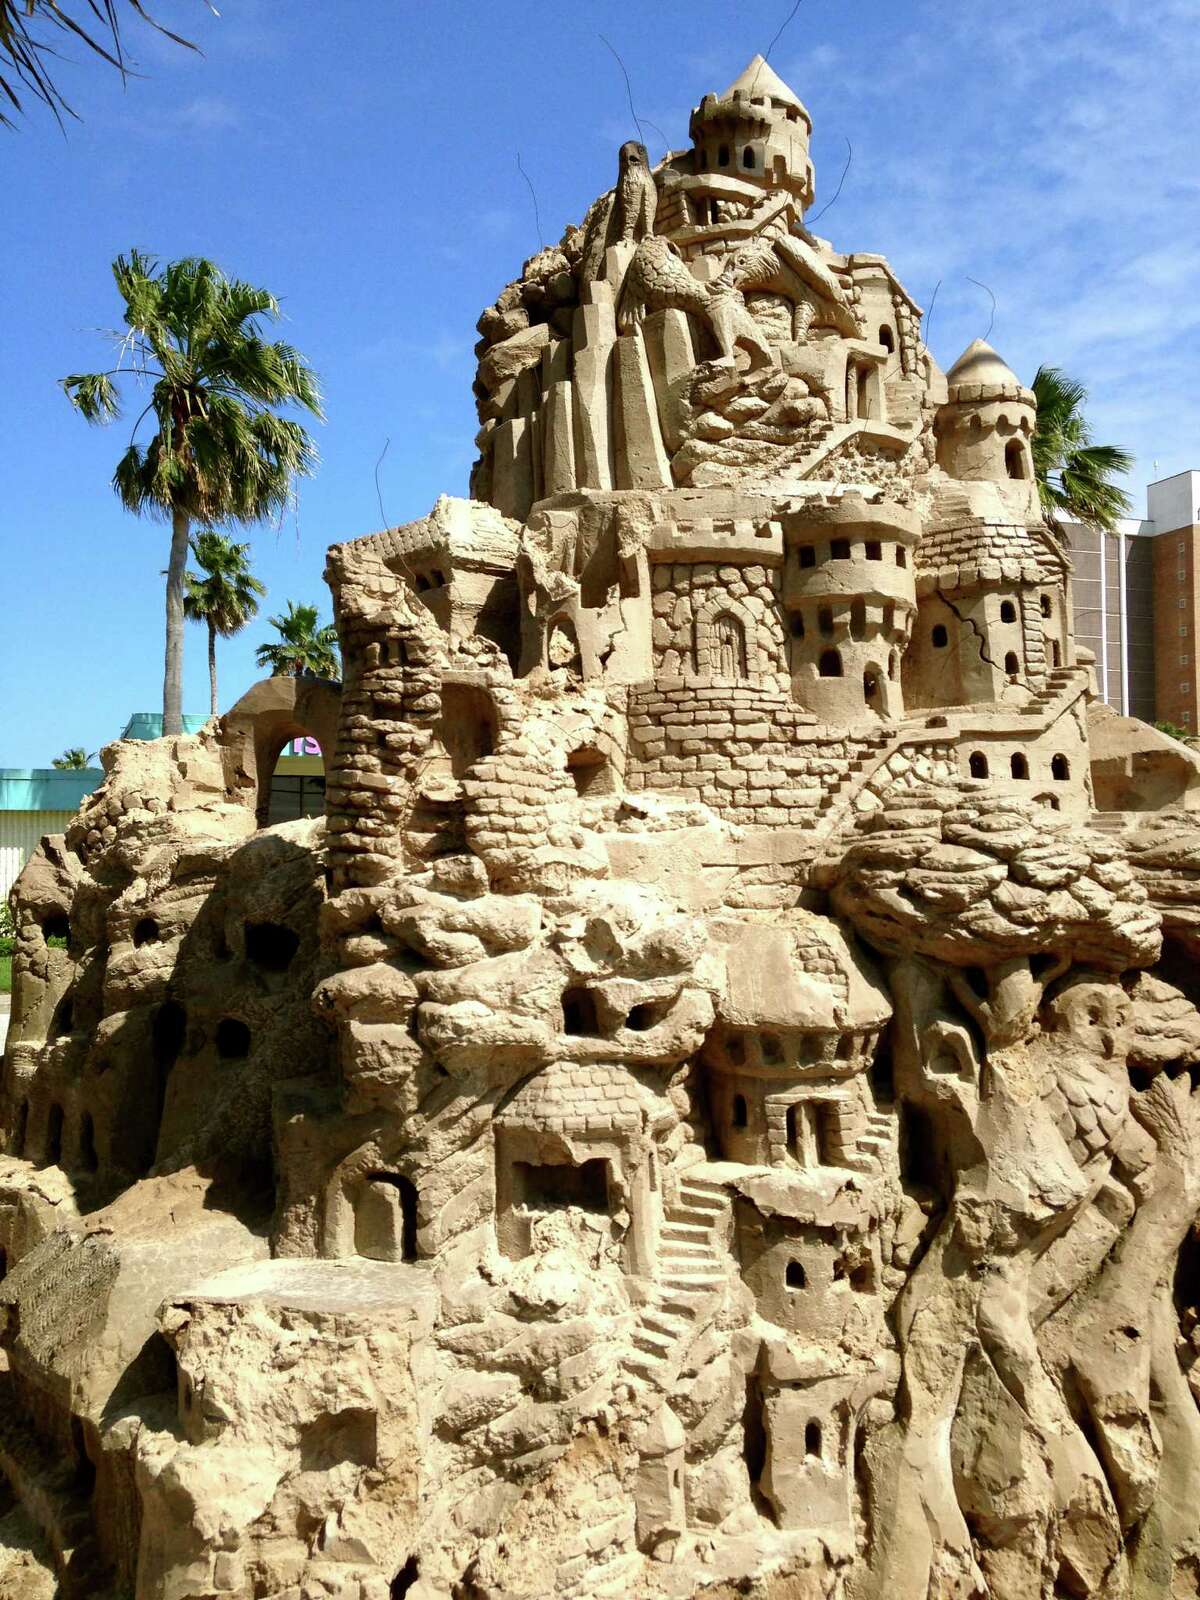 Sandcastle classes are just one of the unique island activities on South Padre Island.